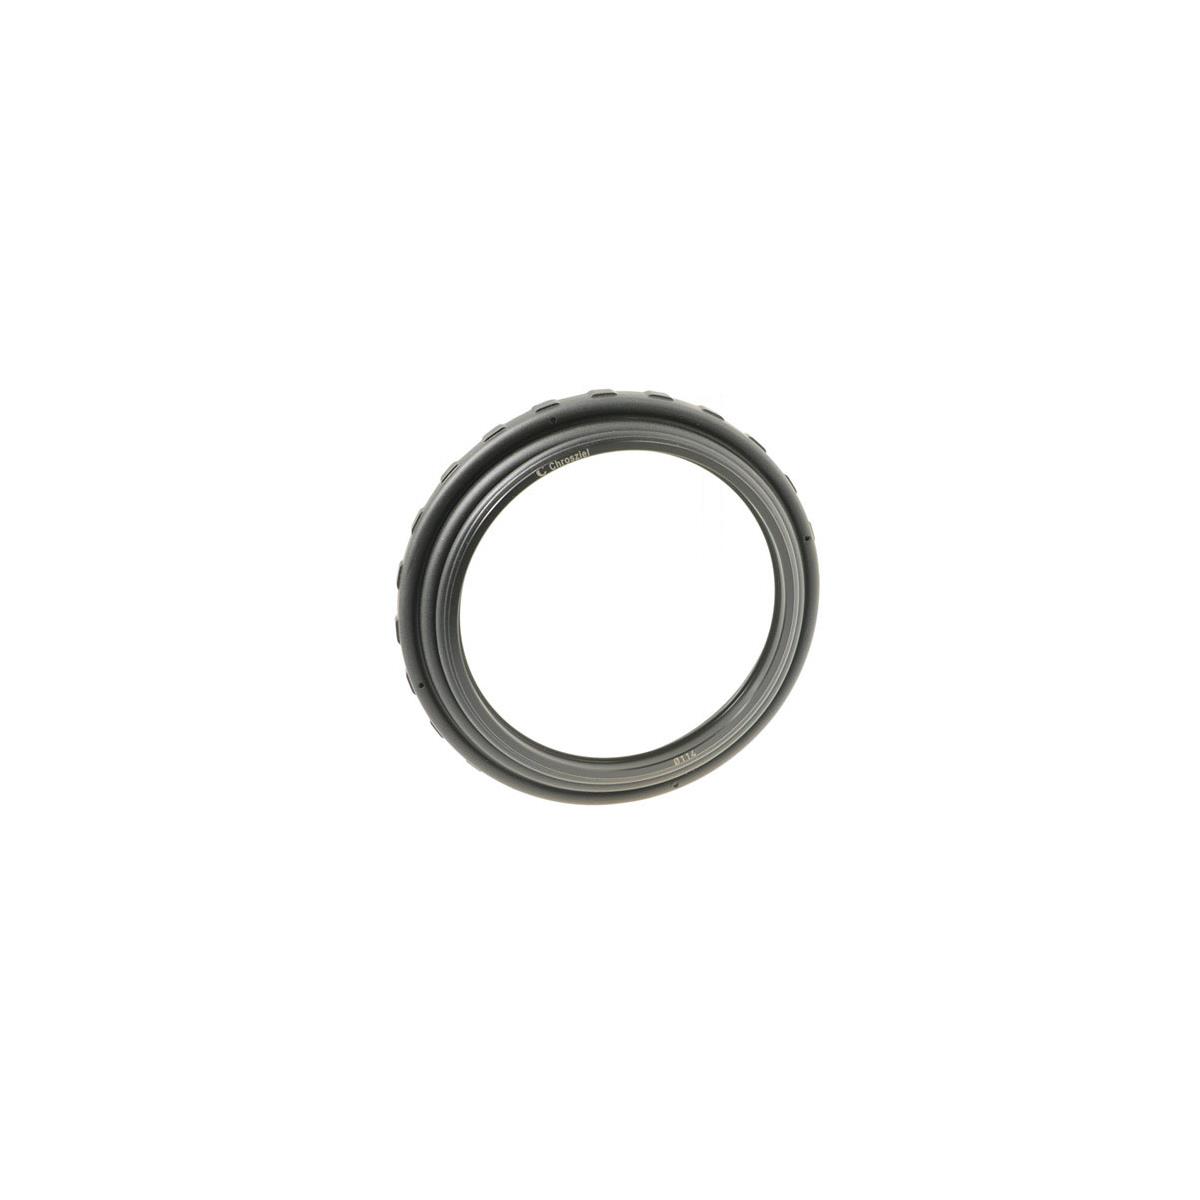 Image of Chrosziel 142.5:114mm Rubber Bellows Ring for Zeiss CP.2 Lenses